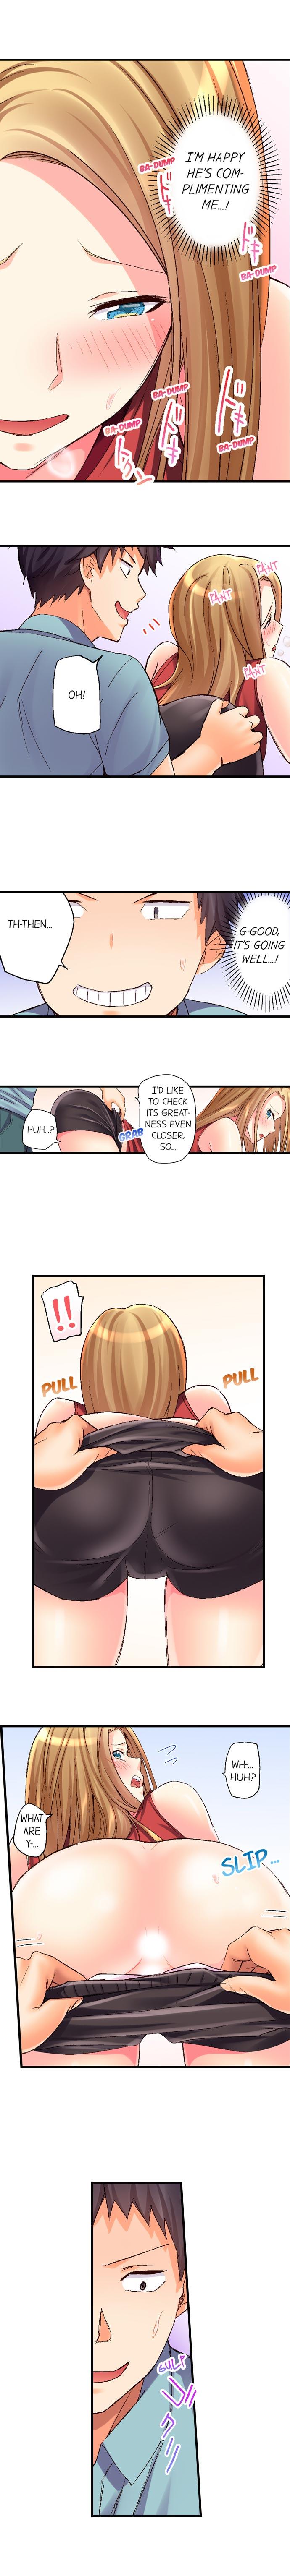 No Panty Booty Workout! Ch. 1 - 15 120